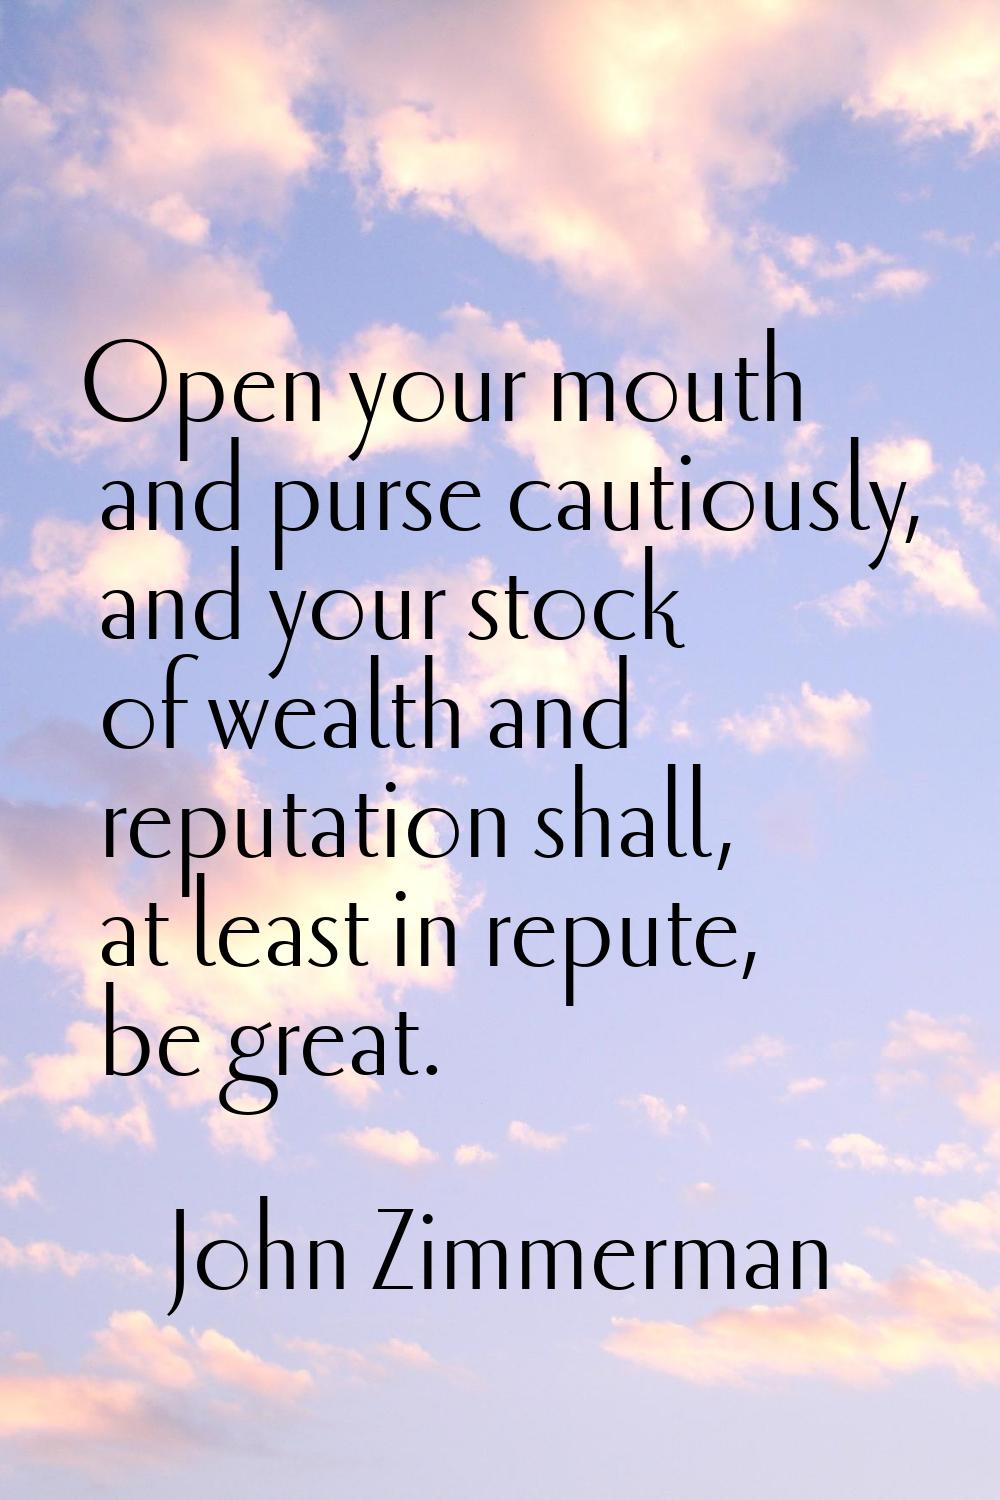 Open your mouth and purse cautiously, and your stock of wealth and reputation shall, at least in re